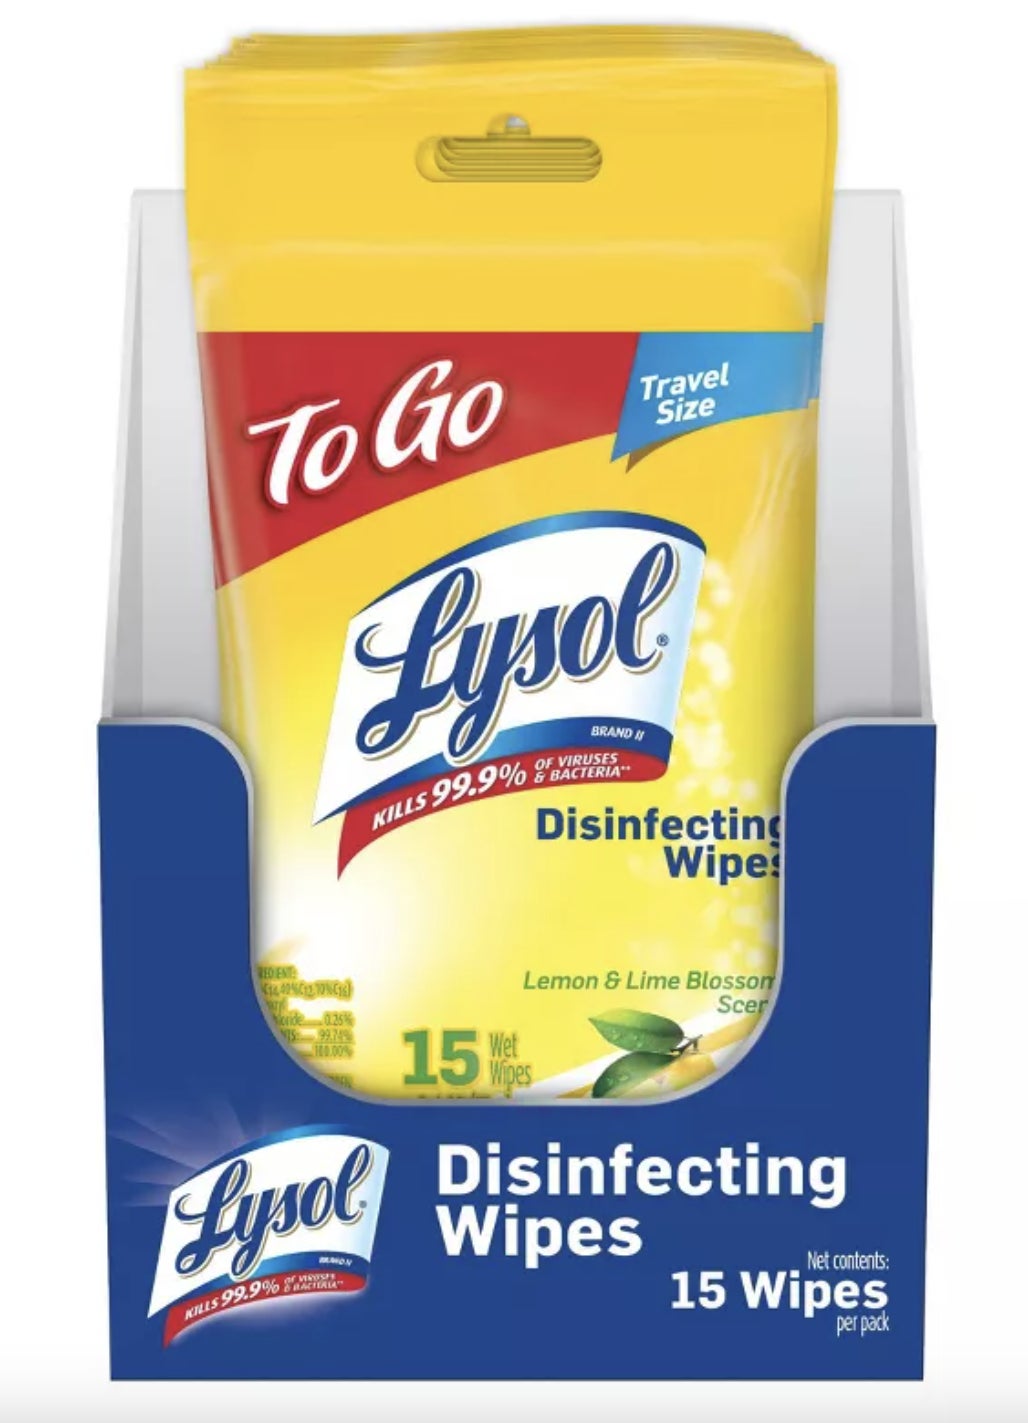 a package of Lysol disinfecting wipes